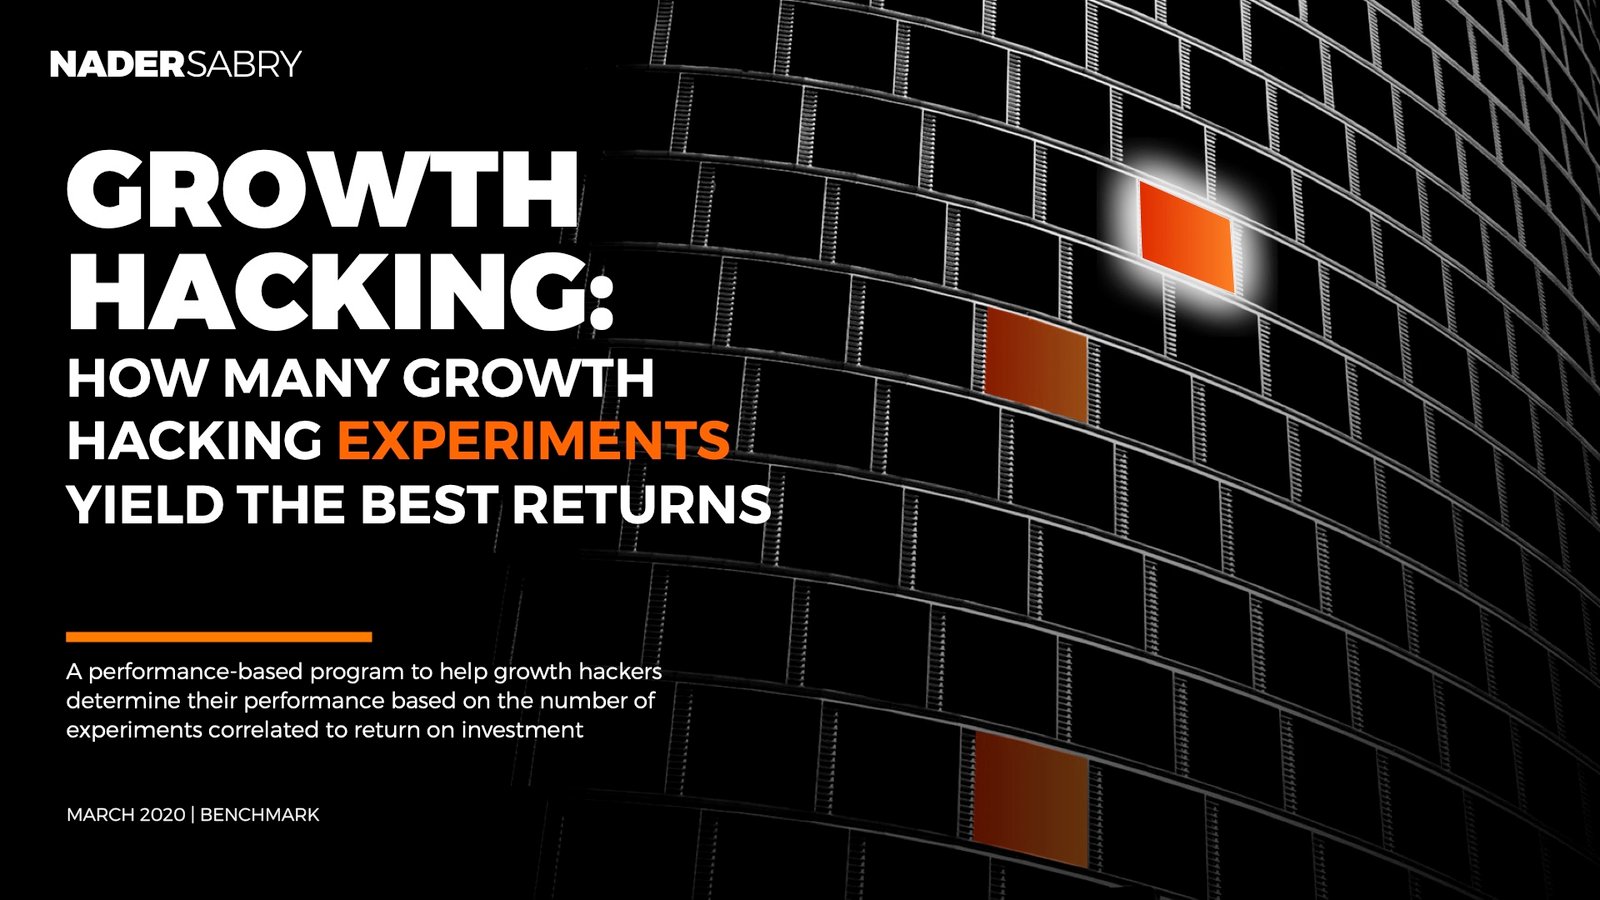 Profitable growth hacking experiments